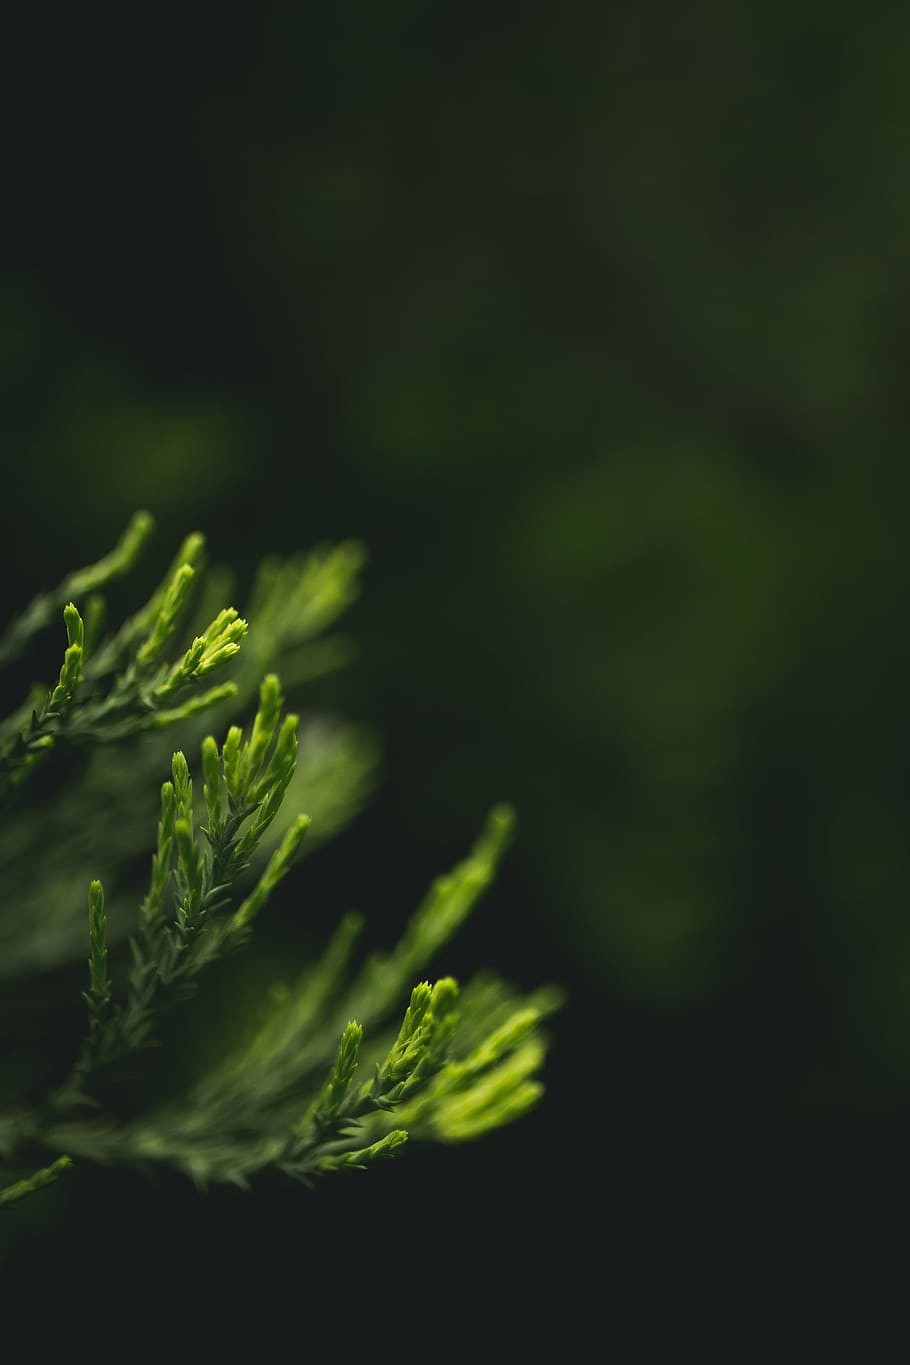 green leafed plant, close, photography, green, leafed, plant, nature, leaves, still, bokeh